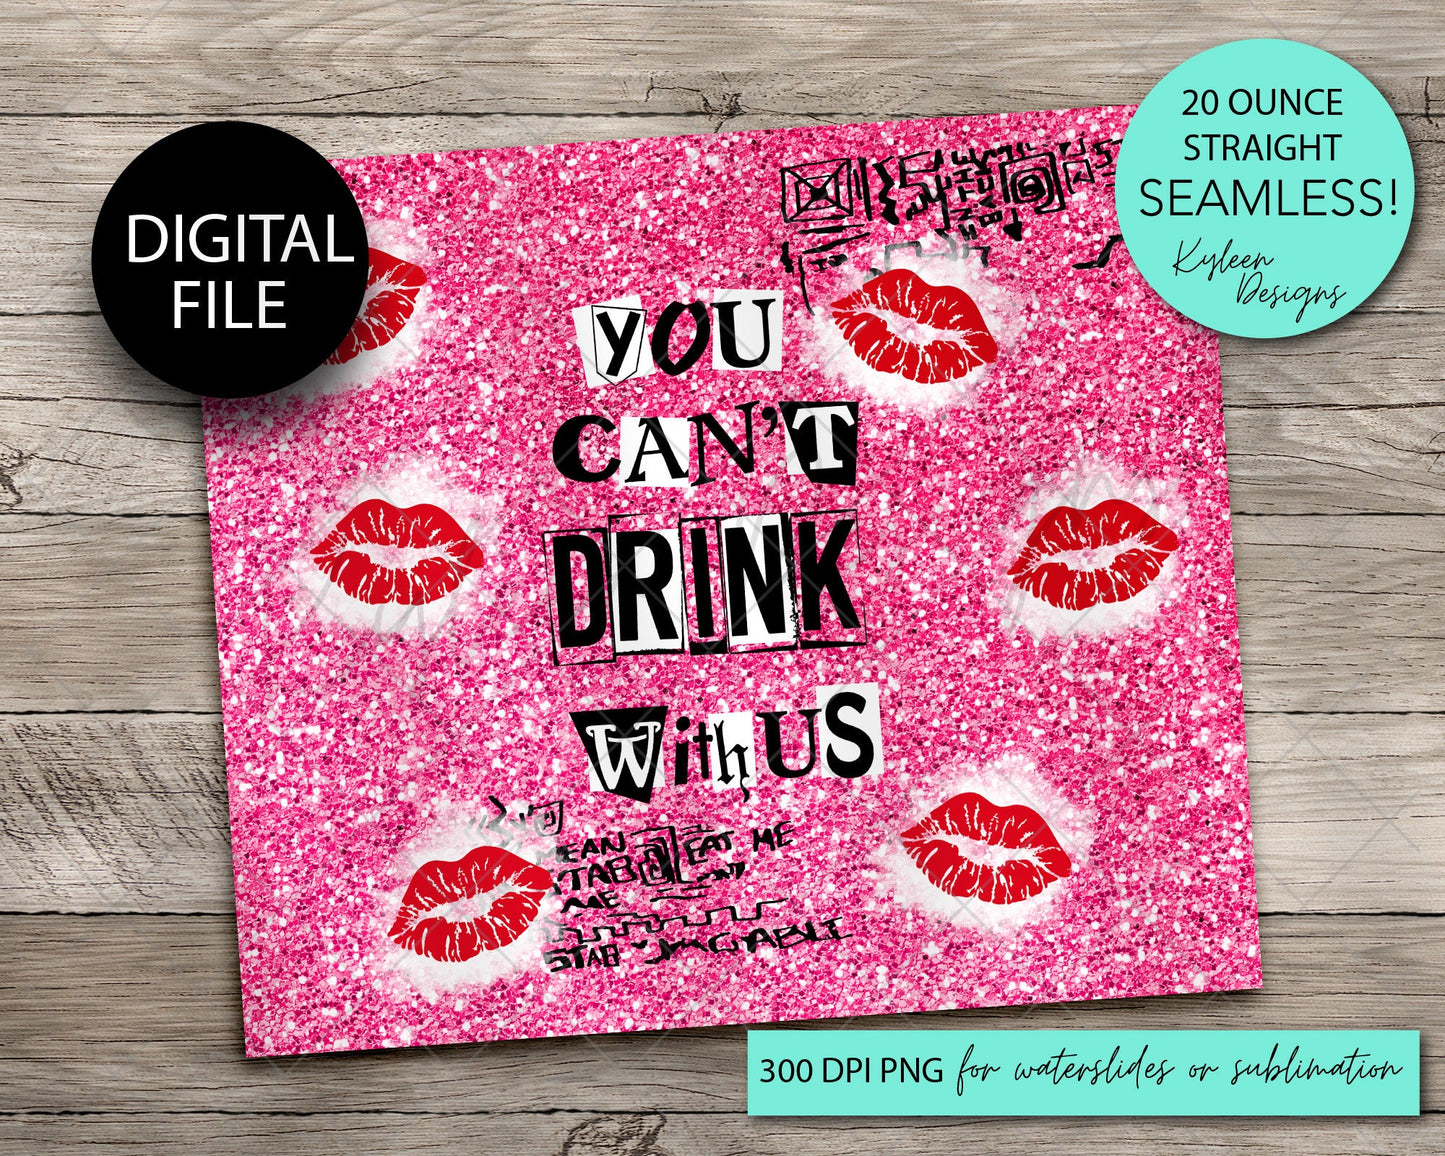 SEAMLESS you can't drink with us 20 ounce tumbler wrap for sublimation, waterslide High res PNG digital file- Straight only